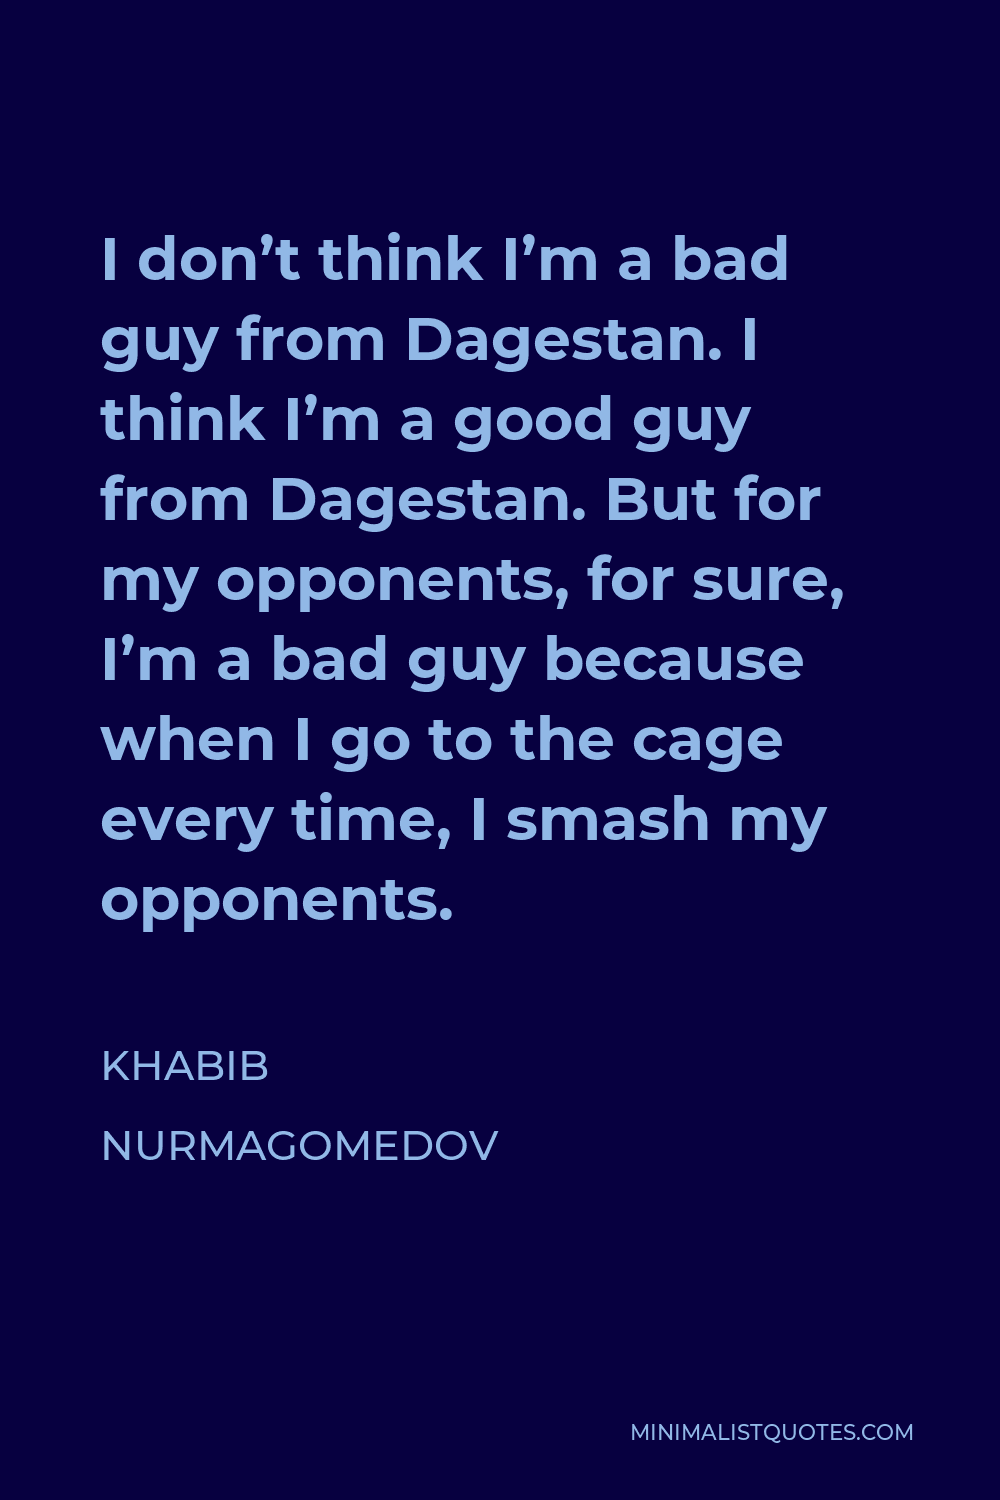 Khabib Nurmagomedov Quote - I don’t think I’m a bad guy from Dagestan. I think I’m a good guy from Dagestan. But for my opponents, for sure, I’m a bad guy because when I go to the cage every time, I smash my opponents.